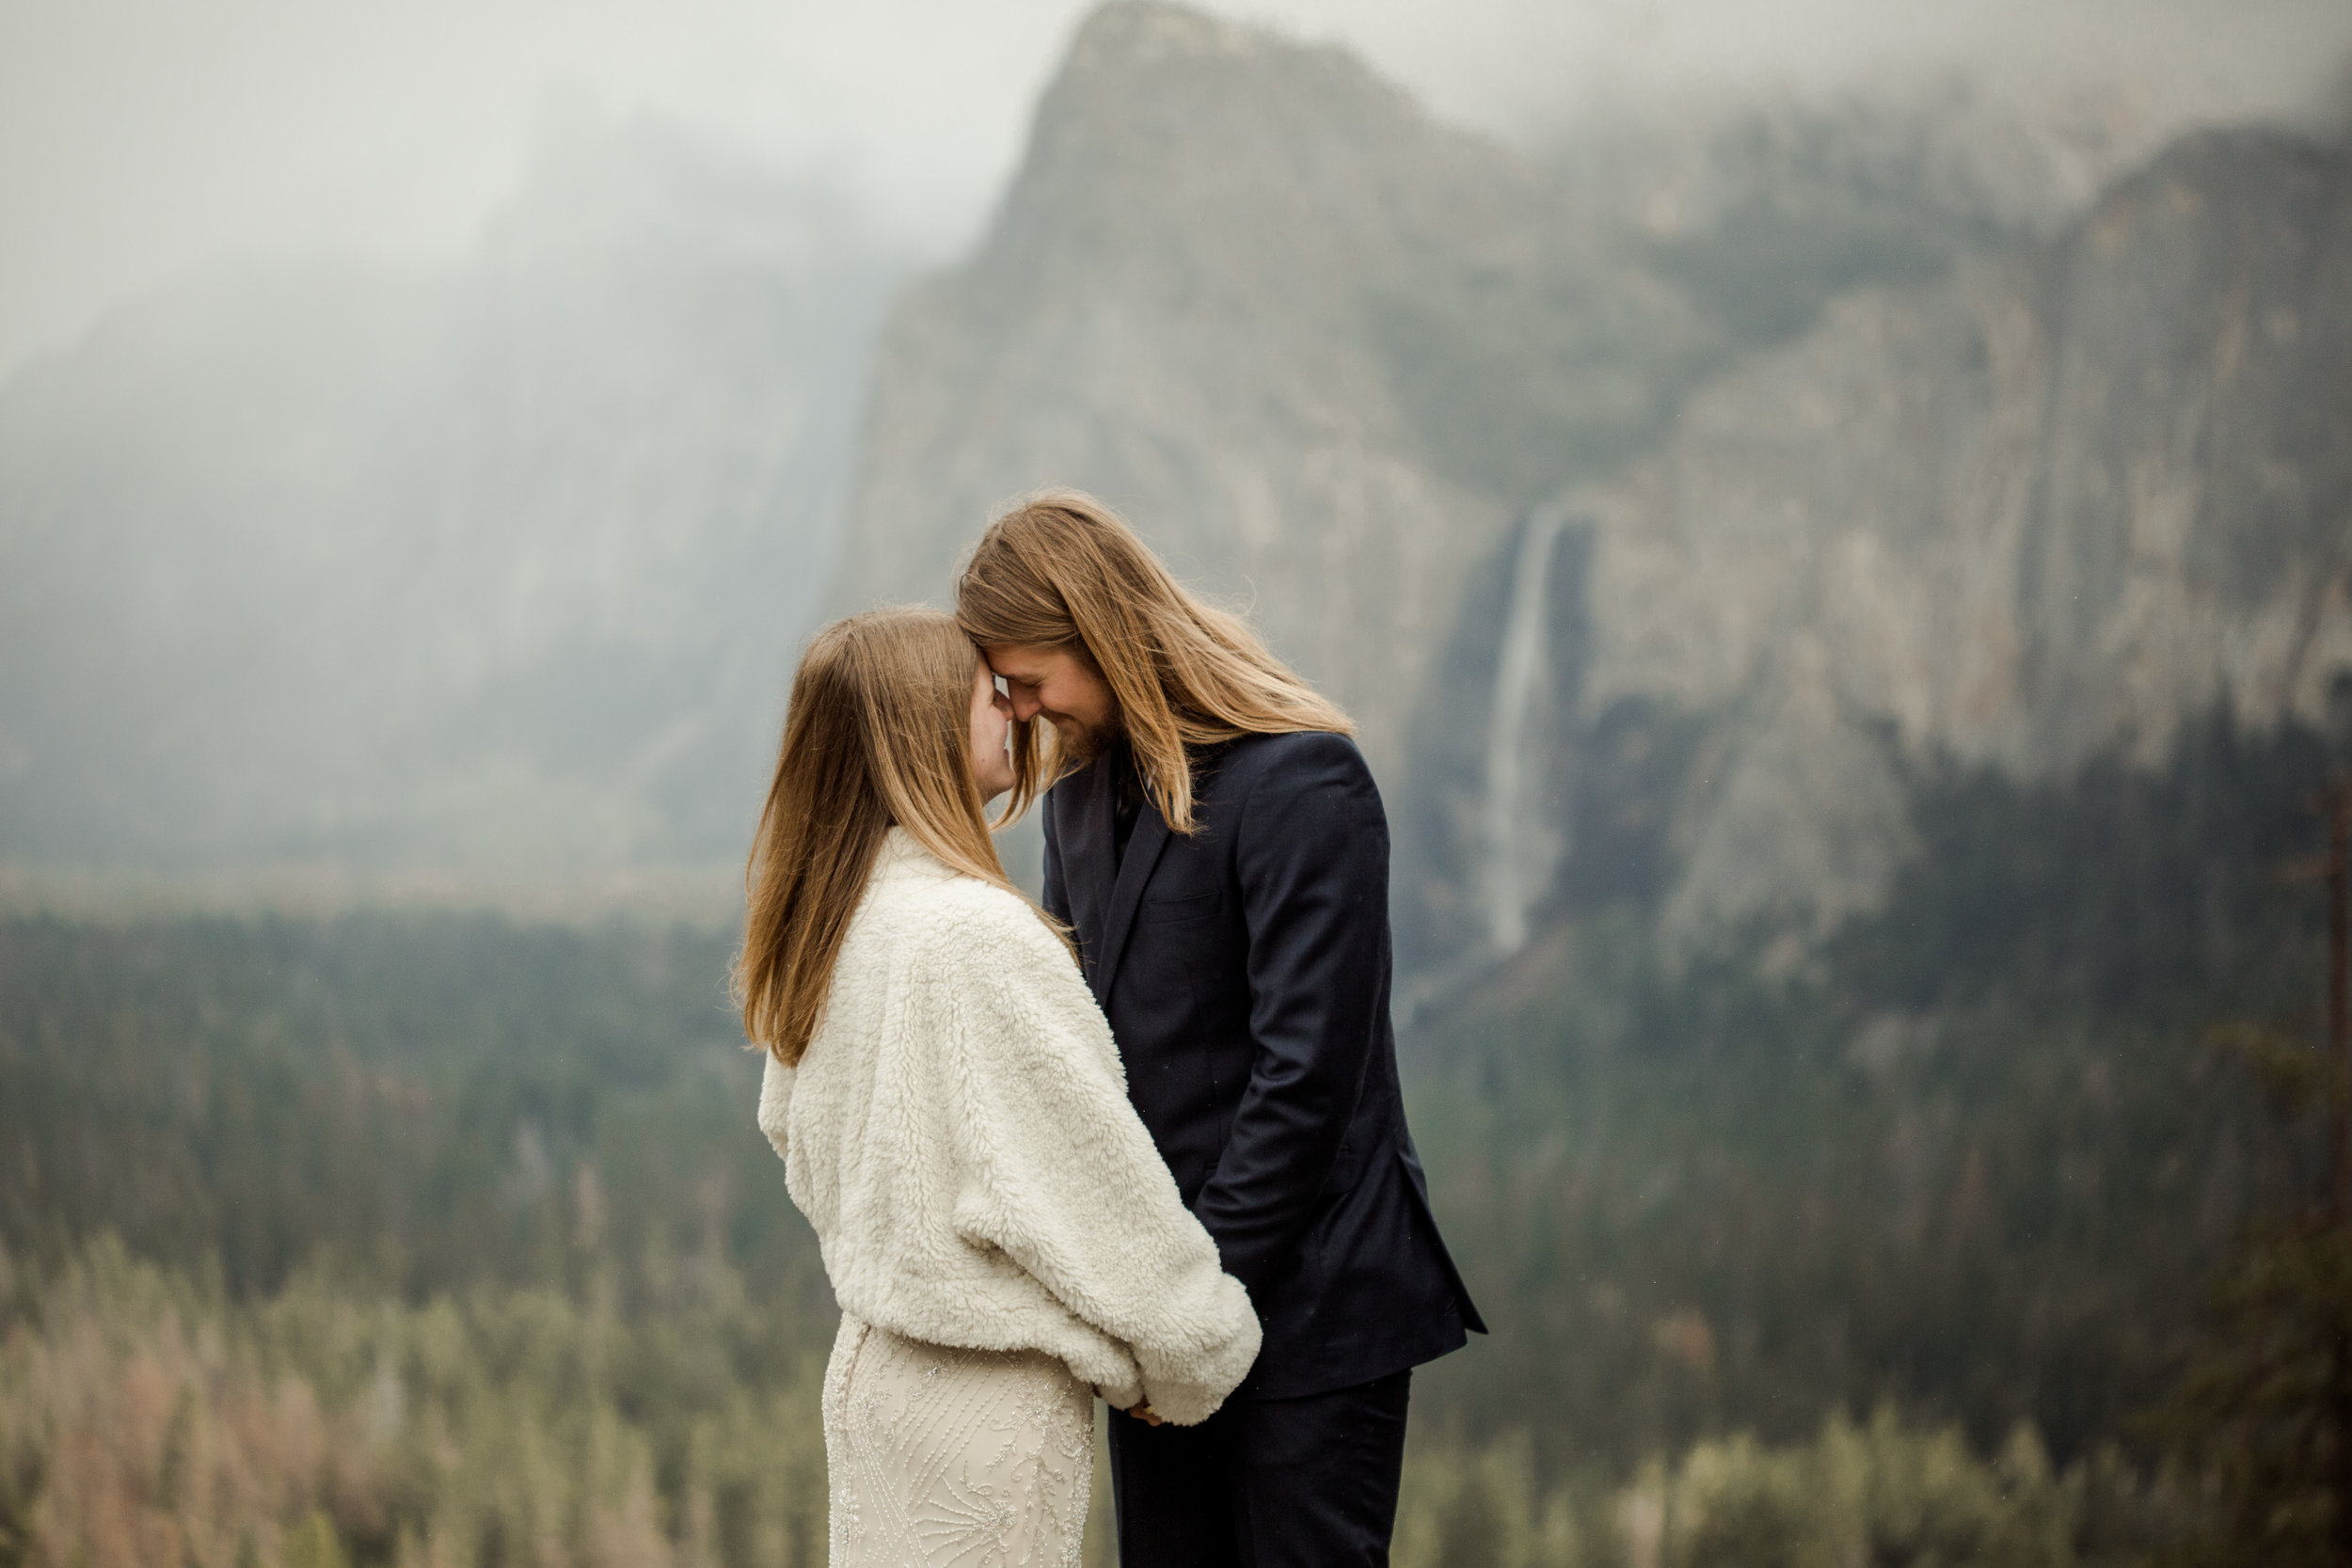 nicole-daacke-photography-yousemite-national-park-elopement-photographer-winter-cloud-moody-elope-inspiration-yosemite-valley-tunnel-view-winter-cloud-fog-weather-wedding-photos-9.jpg